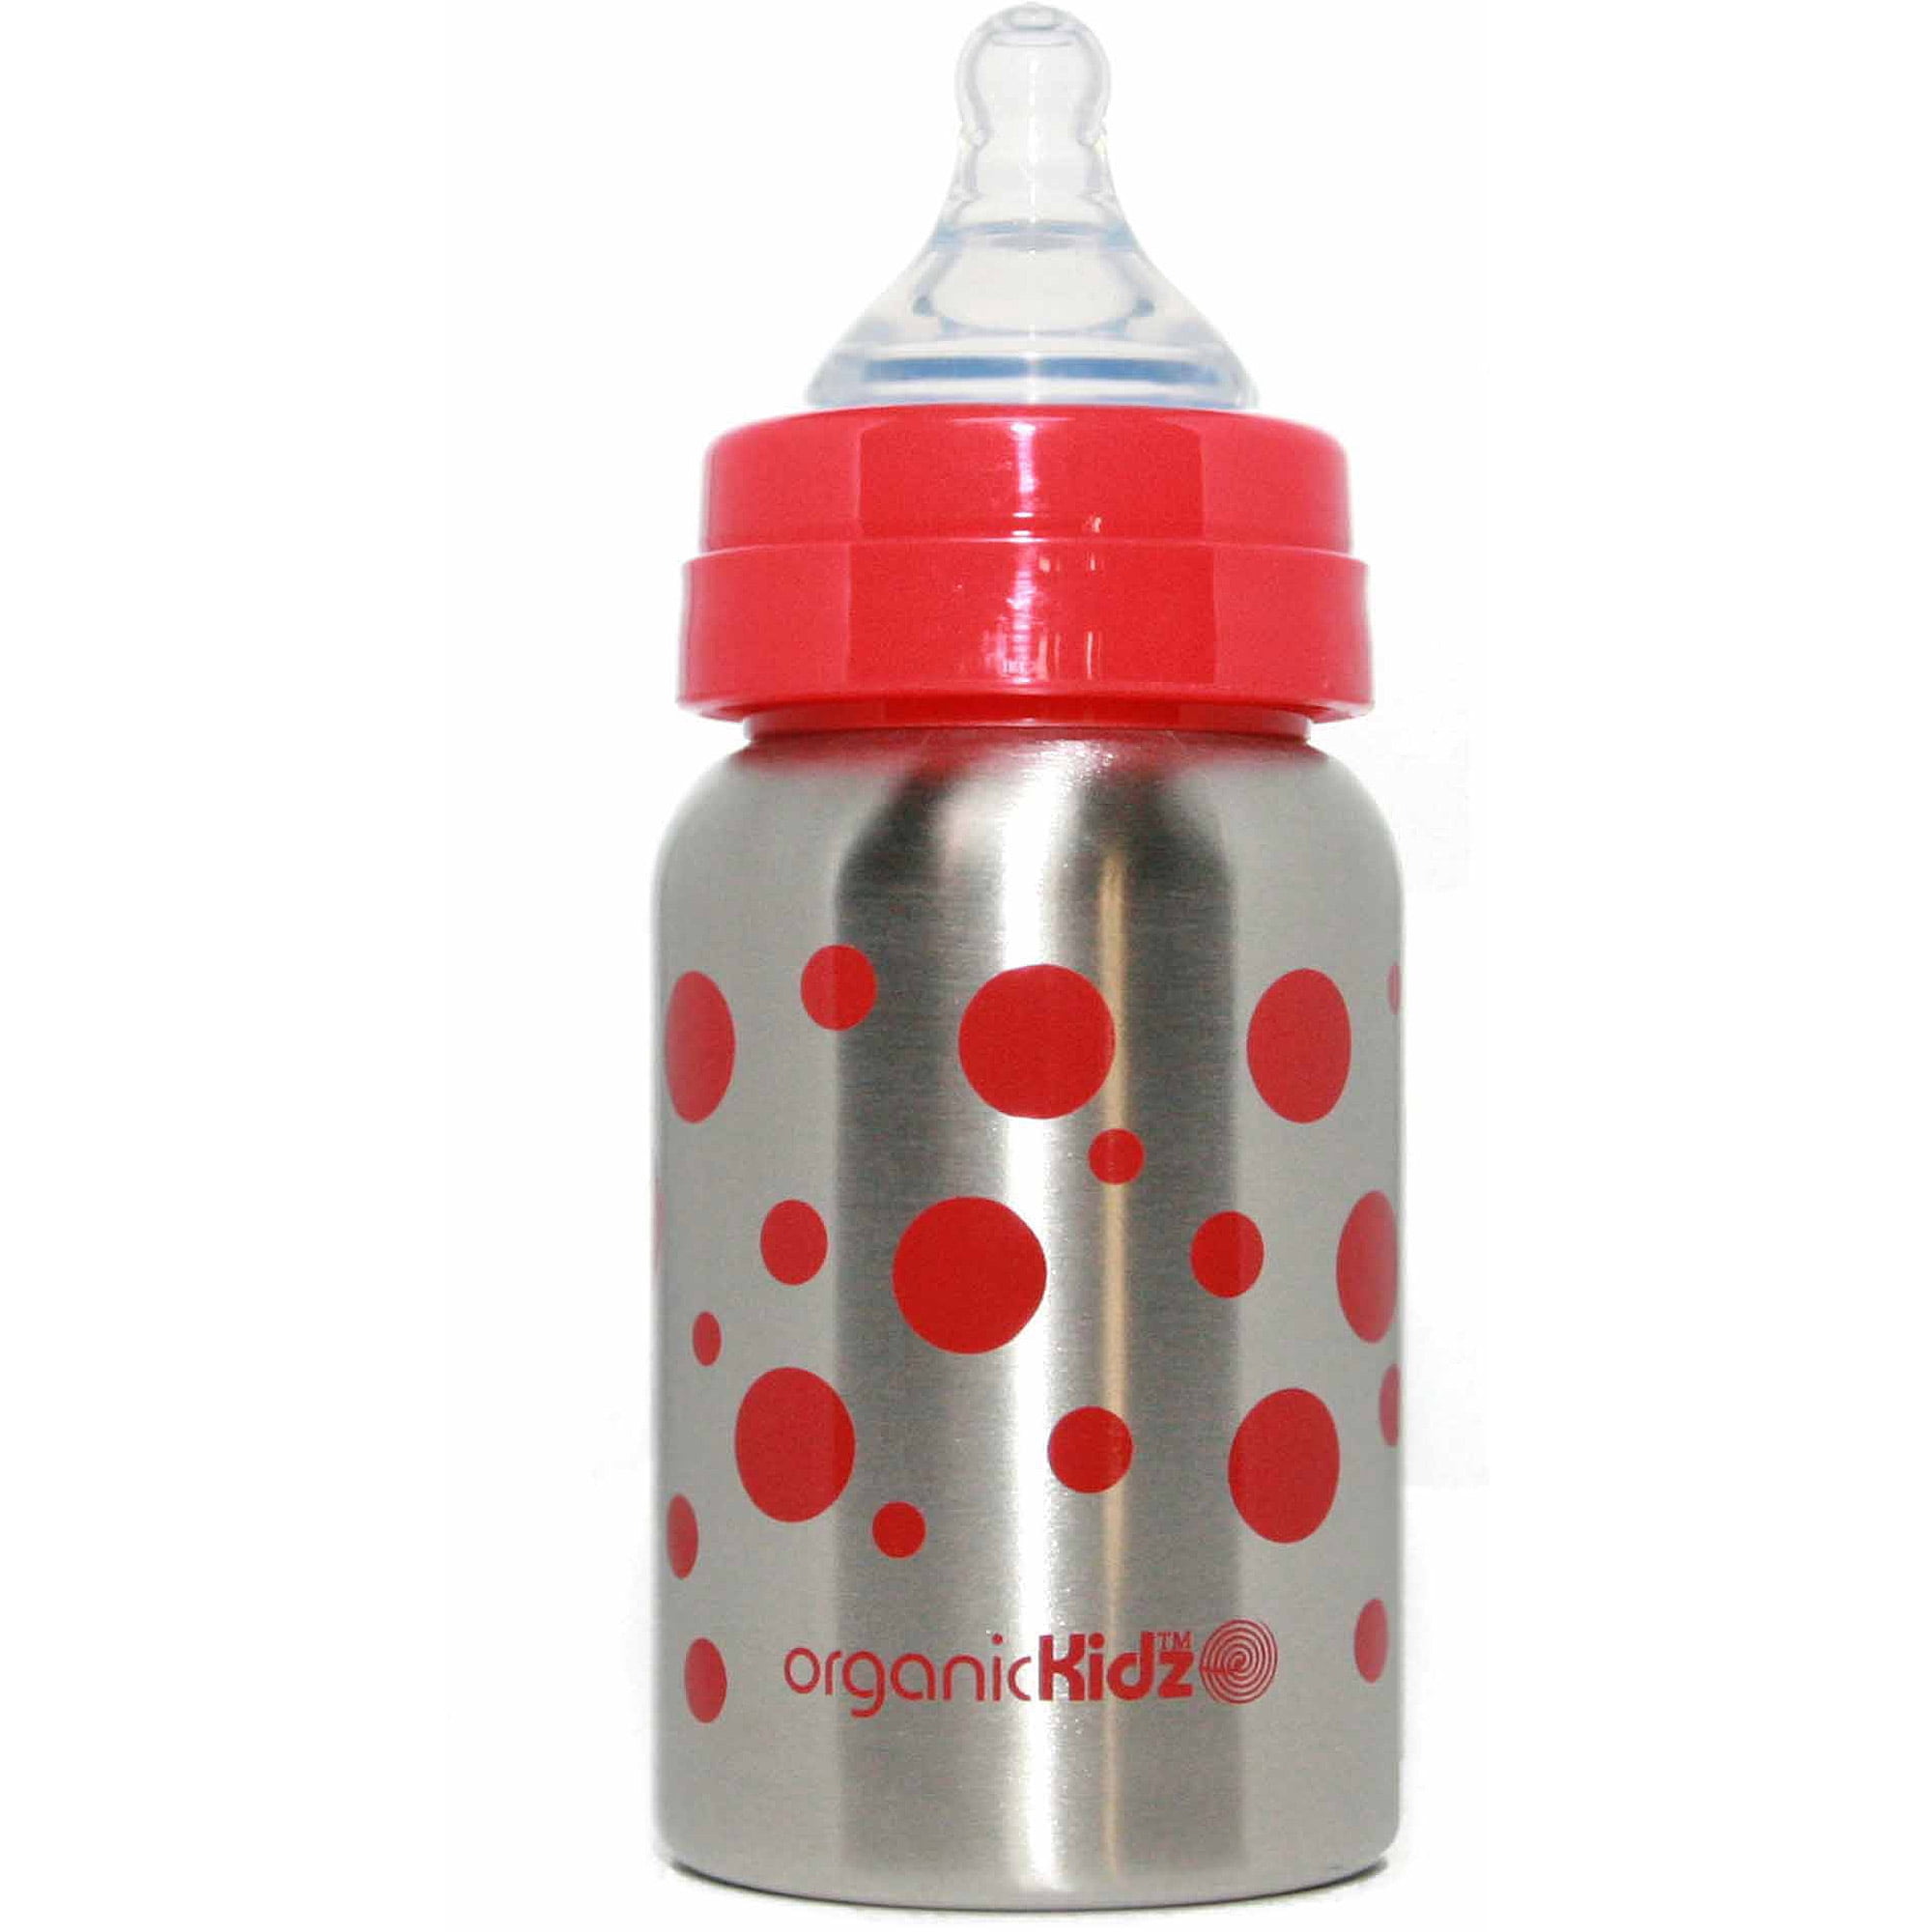 organicKidz 9-oz Stainless Steel Wide Mouthed Baby Bottle, BPA